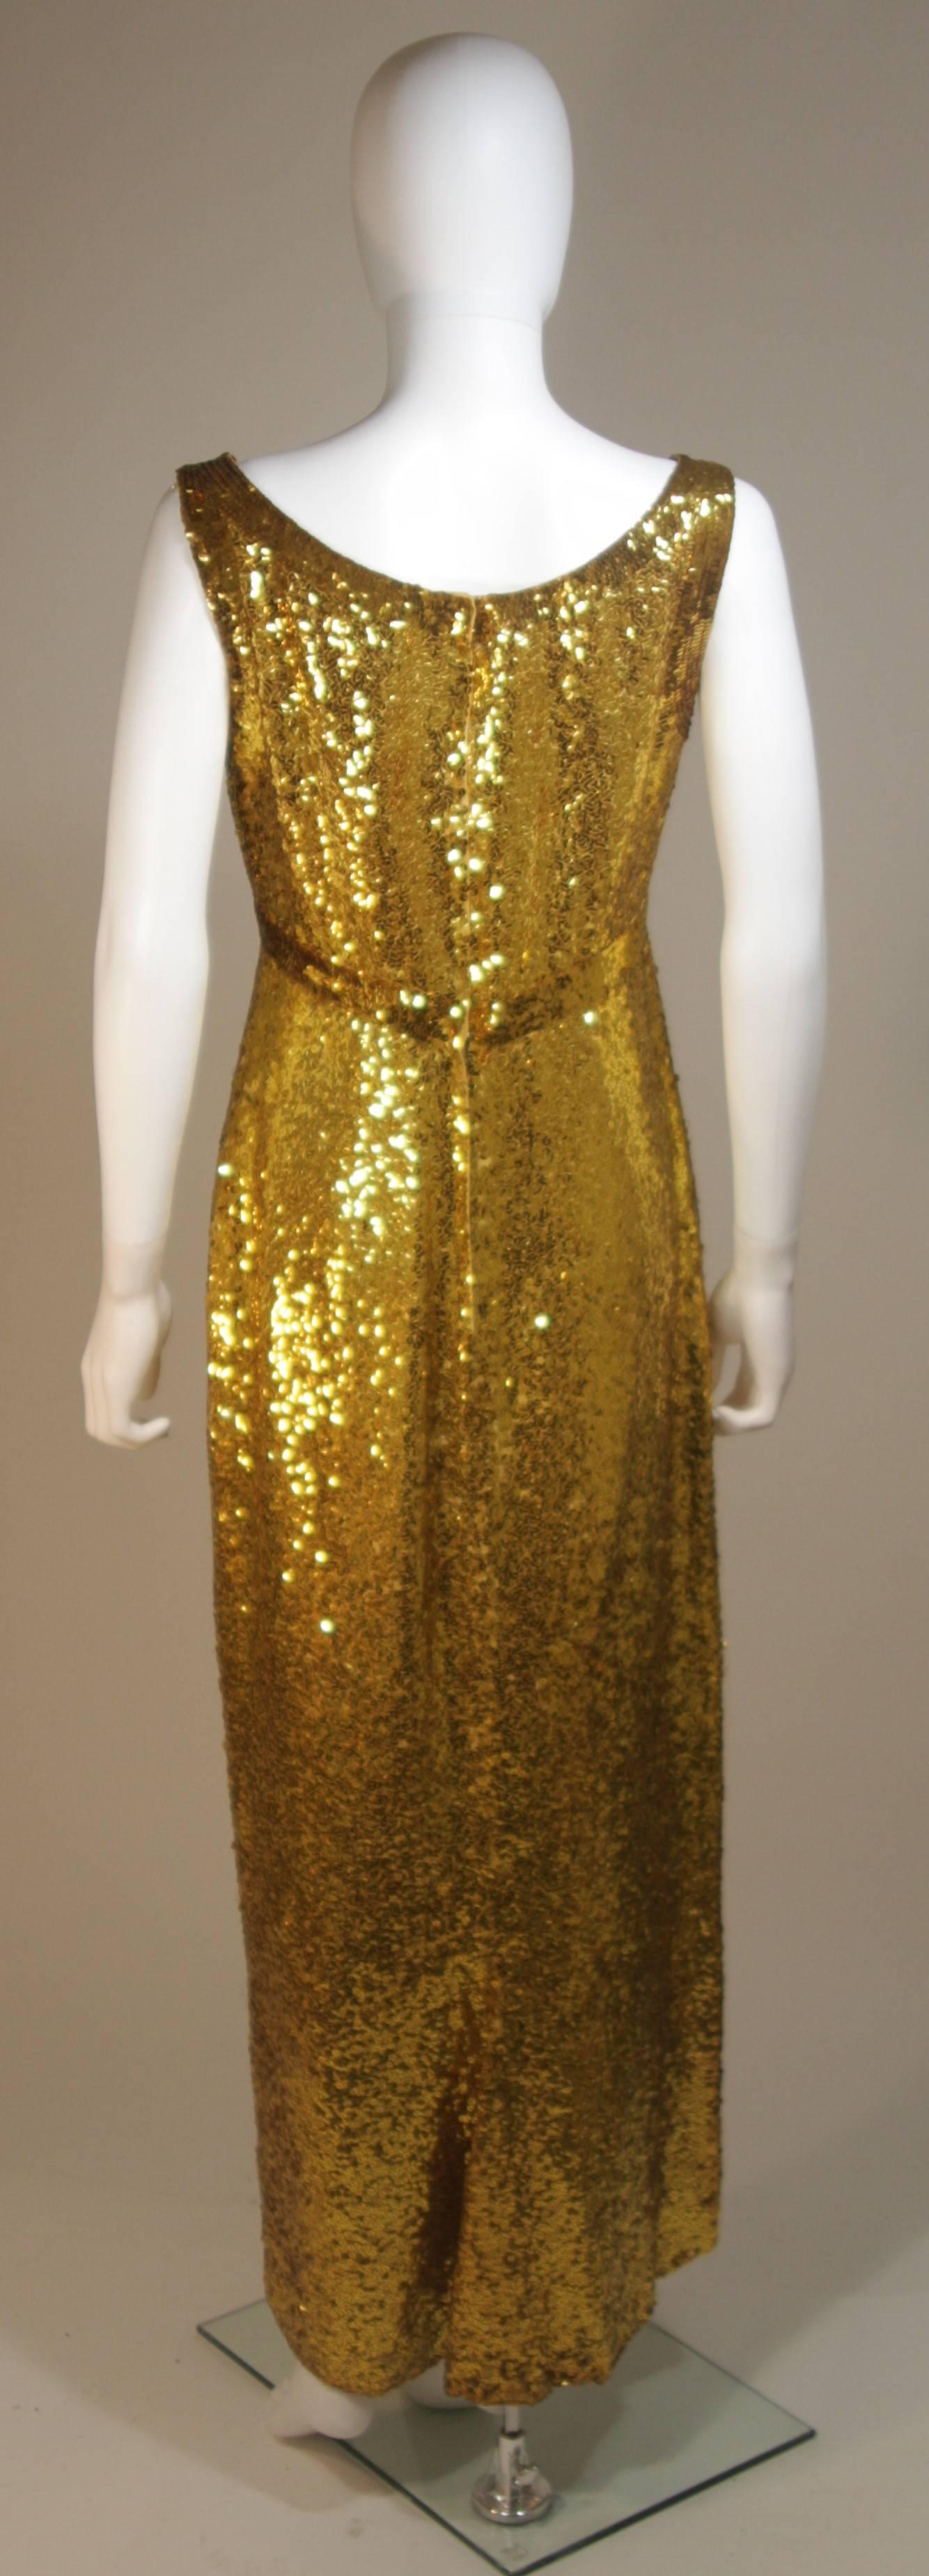 IRENE SARGENT Gold Sequin Gown with Empire Bust Size 6-8 For Sale 2